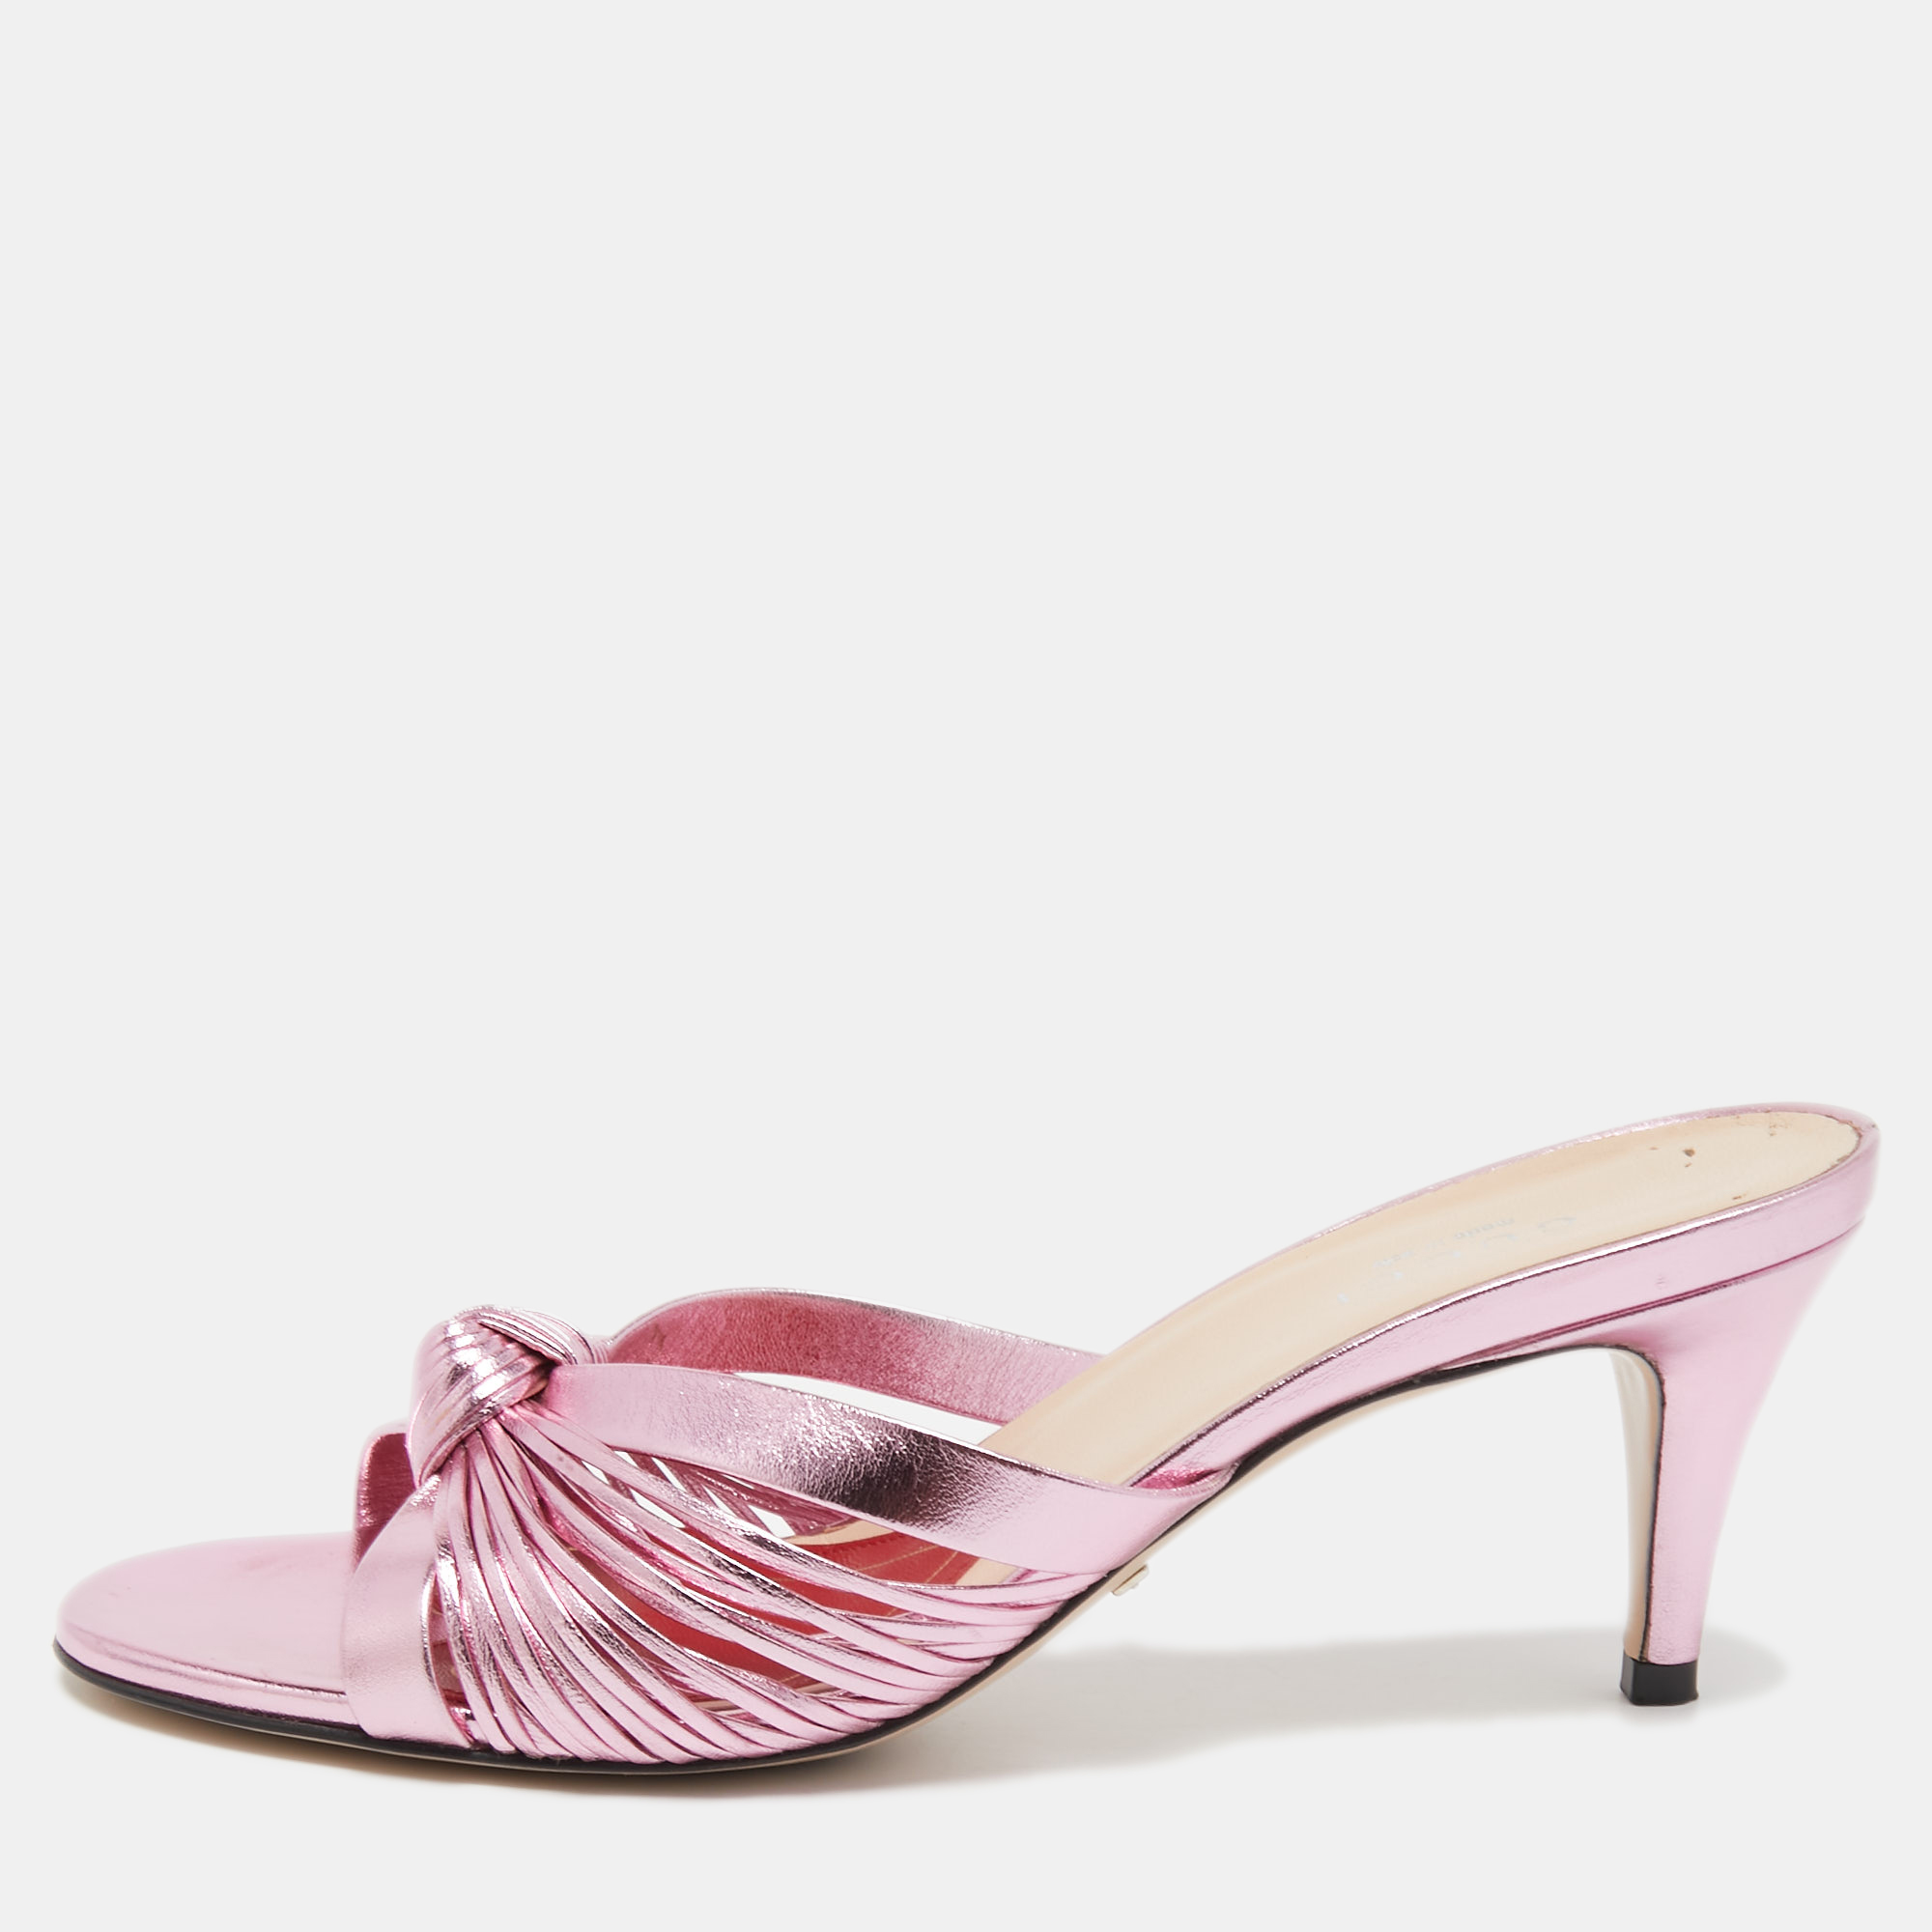 

Gucci Metallic Pink Leather Knotted Slide Sandals Size